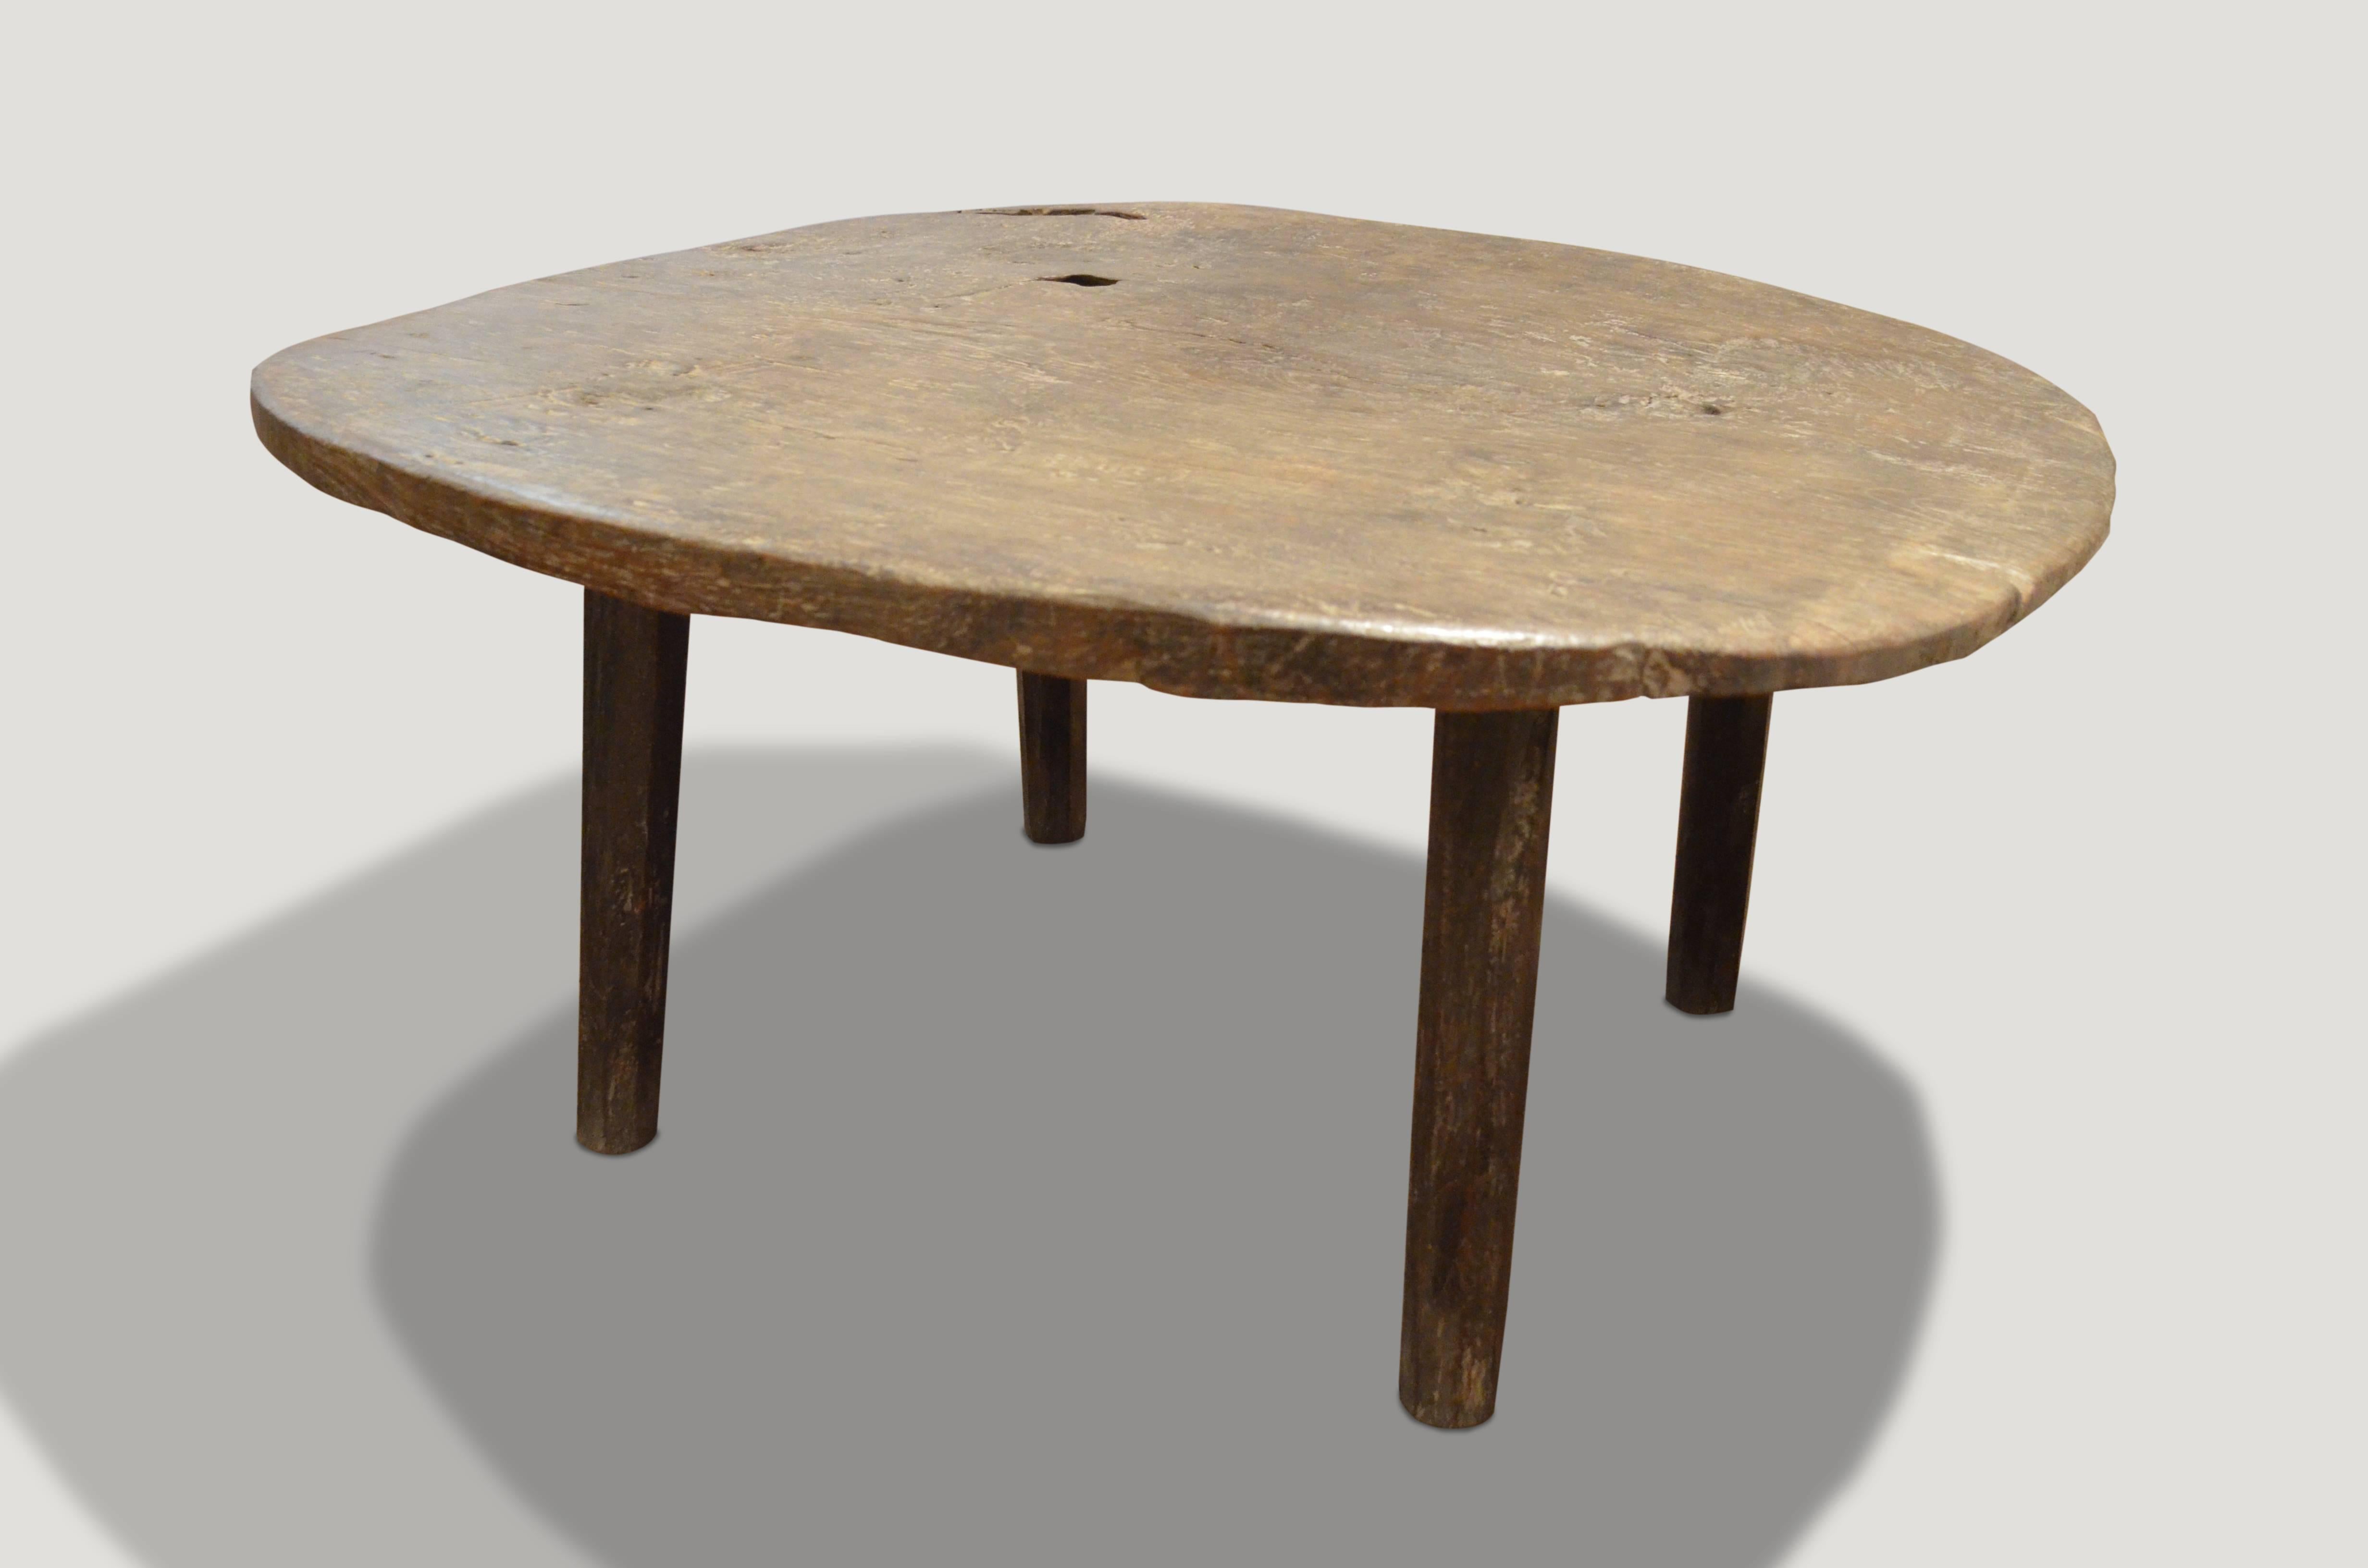 Unique single teak wood slab coffee table with beautiful patina. This coffee table has hand-carved bevelled legs with a hand-carved top with impressive scale. We can reduce the height if preferred.

This coffee table was sourced in the spirit of